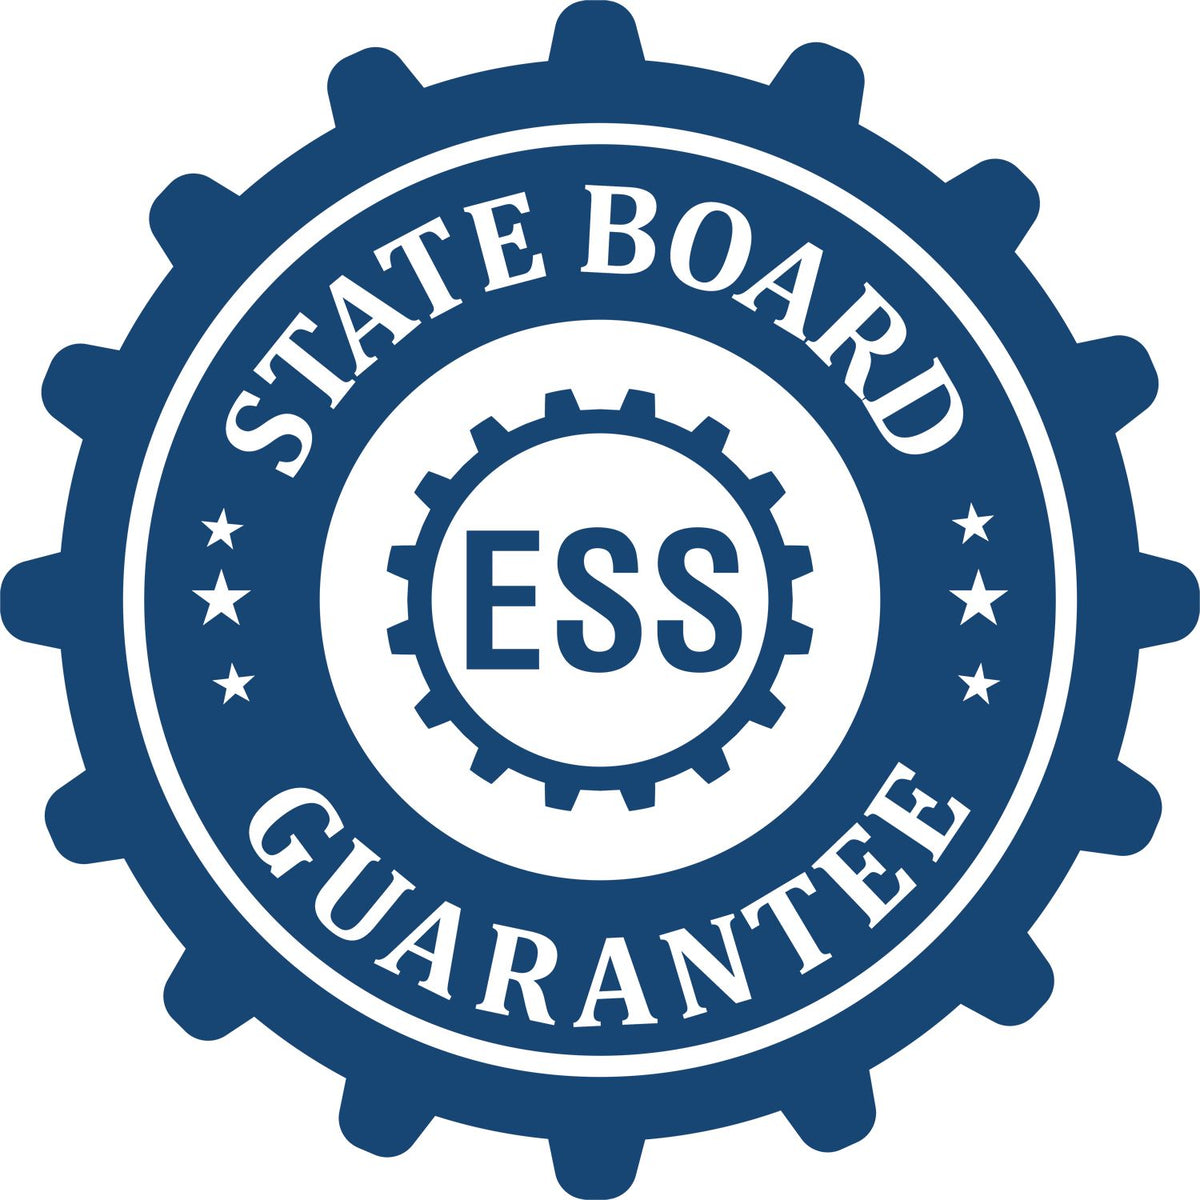 An emblem in a gear shape illustrating a state board guarantee for the Wooden Handle New Jersey State Seal Notary Public Stamp product.